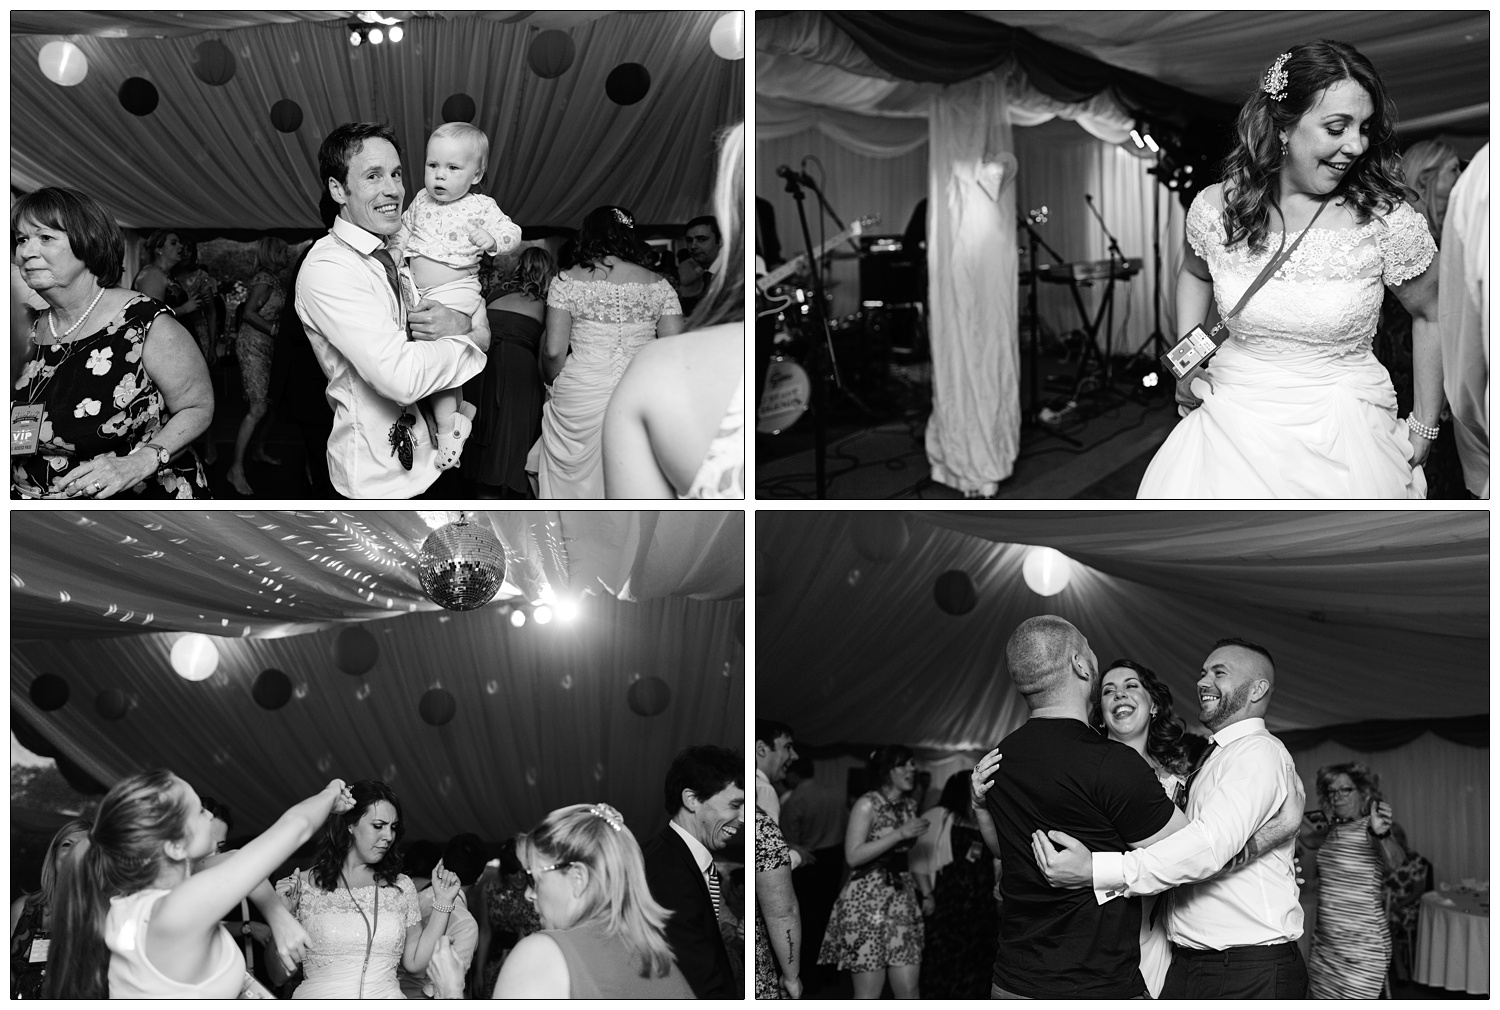 Candid pictures of people dancing at a wedding reception in a garden at home.